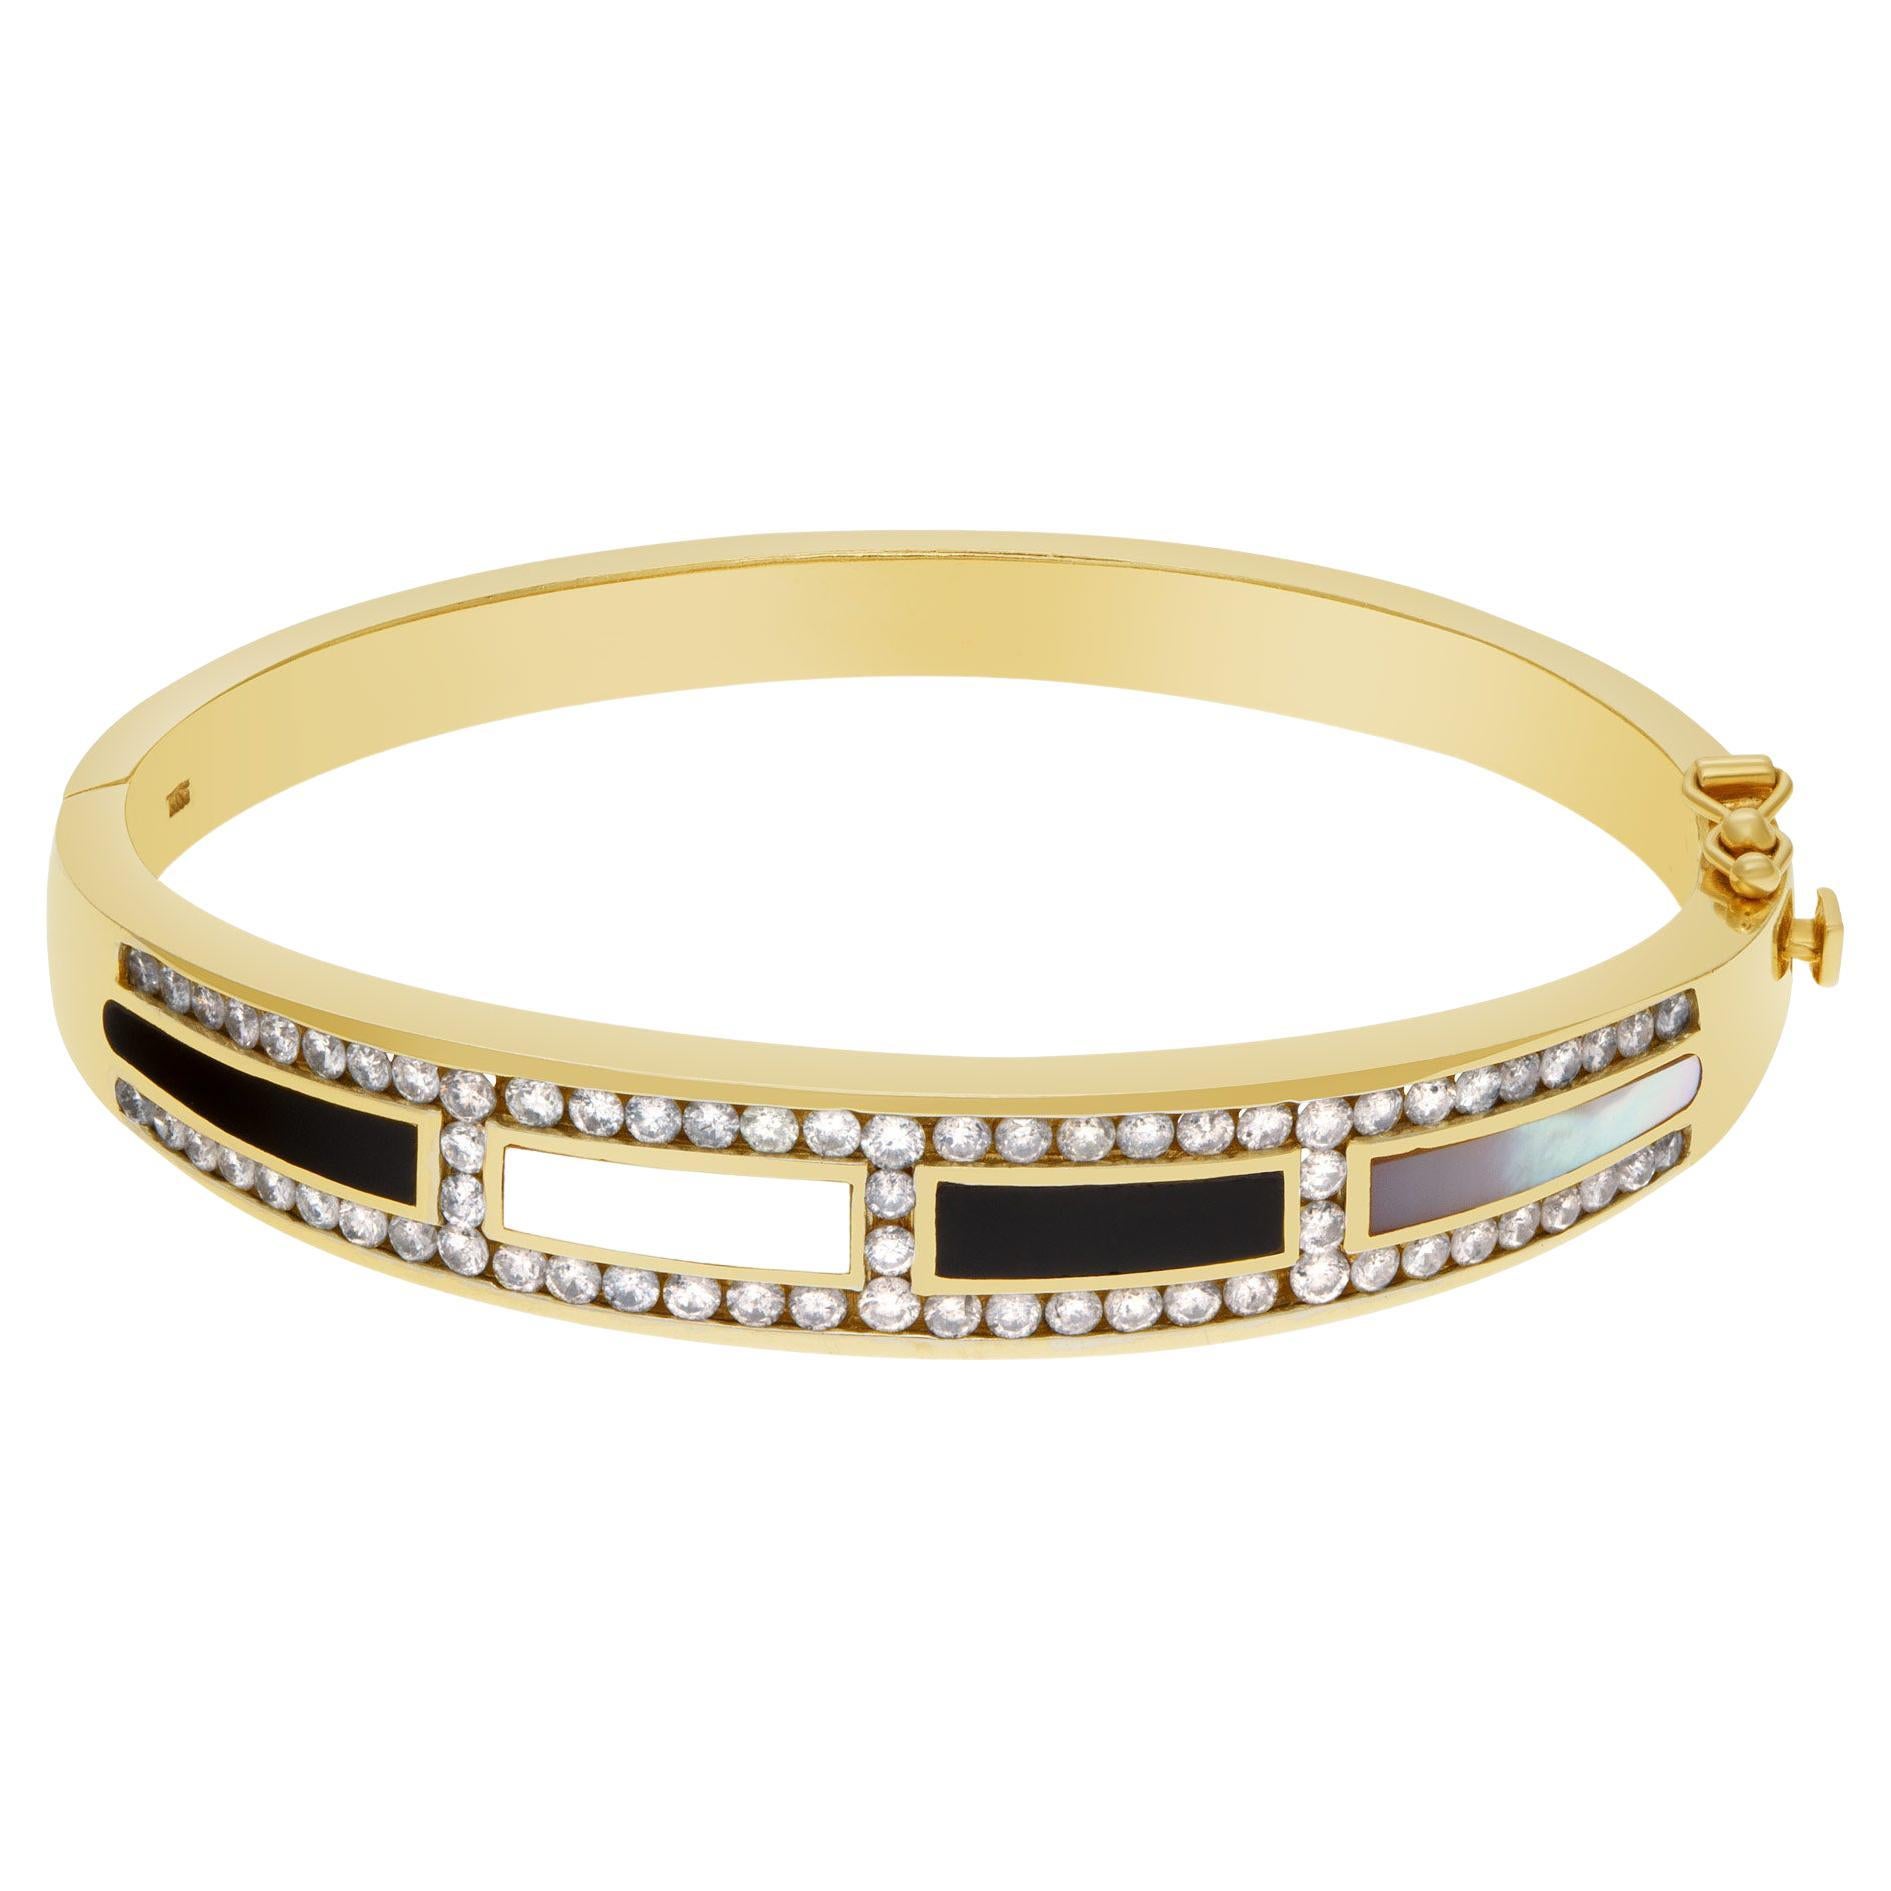 Regal Diamond Bangle in 14k with Mother of Pearl, Black Onyx Inlay and Diamonds For Sale